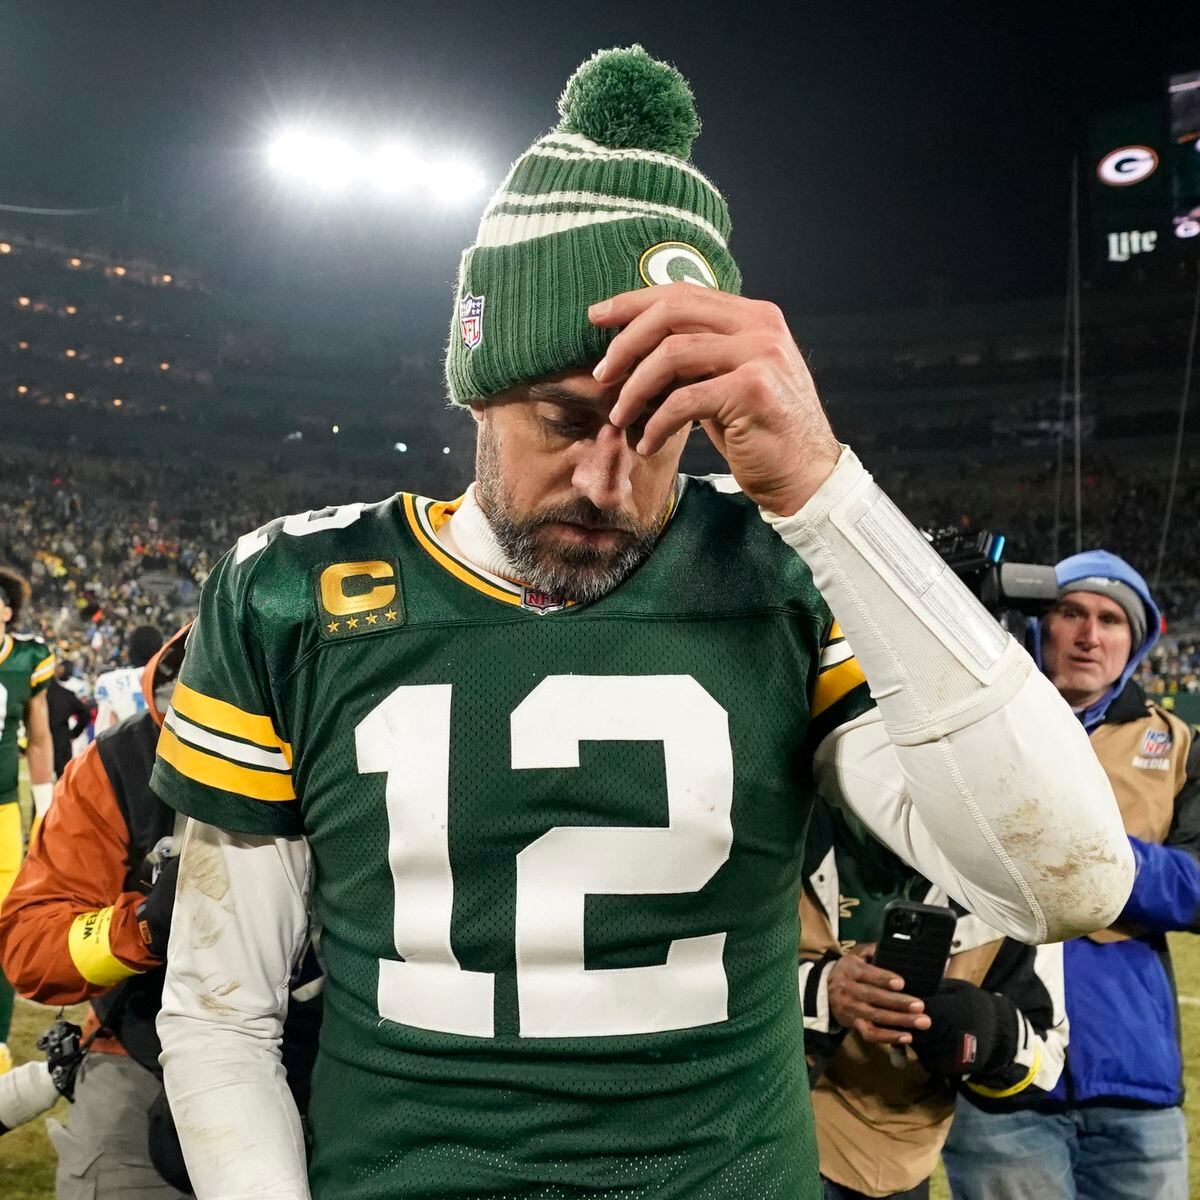 Another disappointing Aaron Rodgers playoff loss, as Packers are